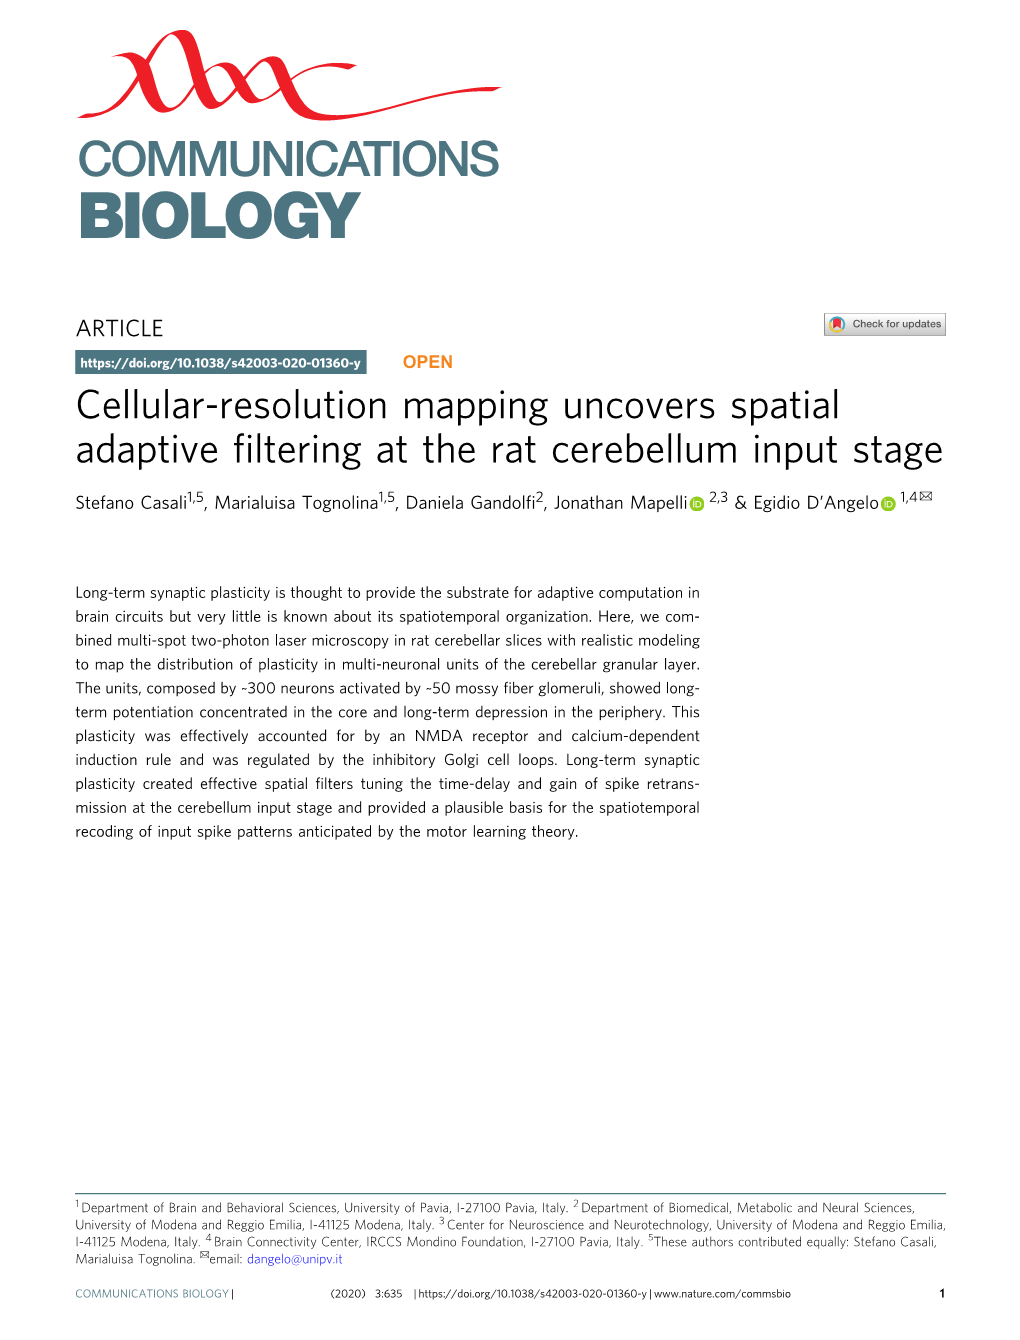 Cellular-Resolution Mapping Uncovers Spatial Adaptive Filtering at the Rat Cerebellum Input Stage